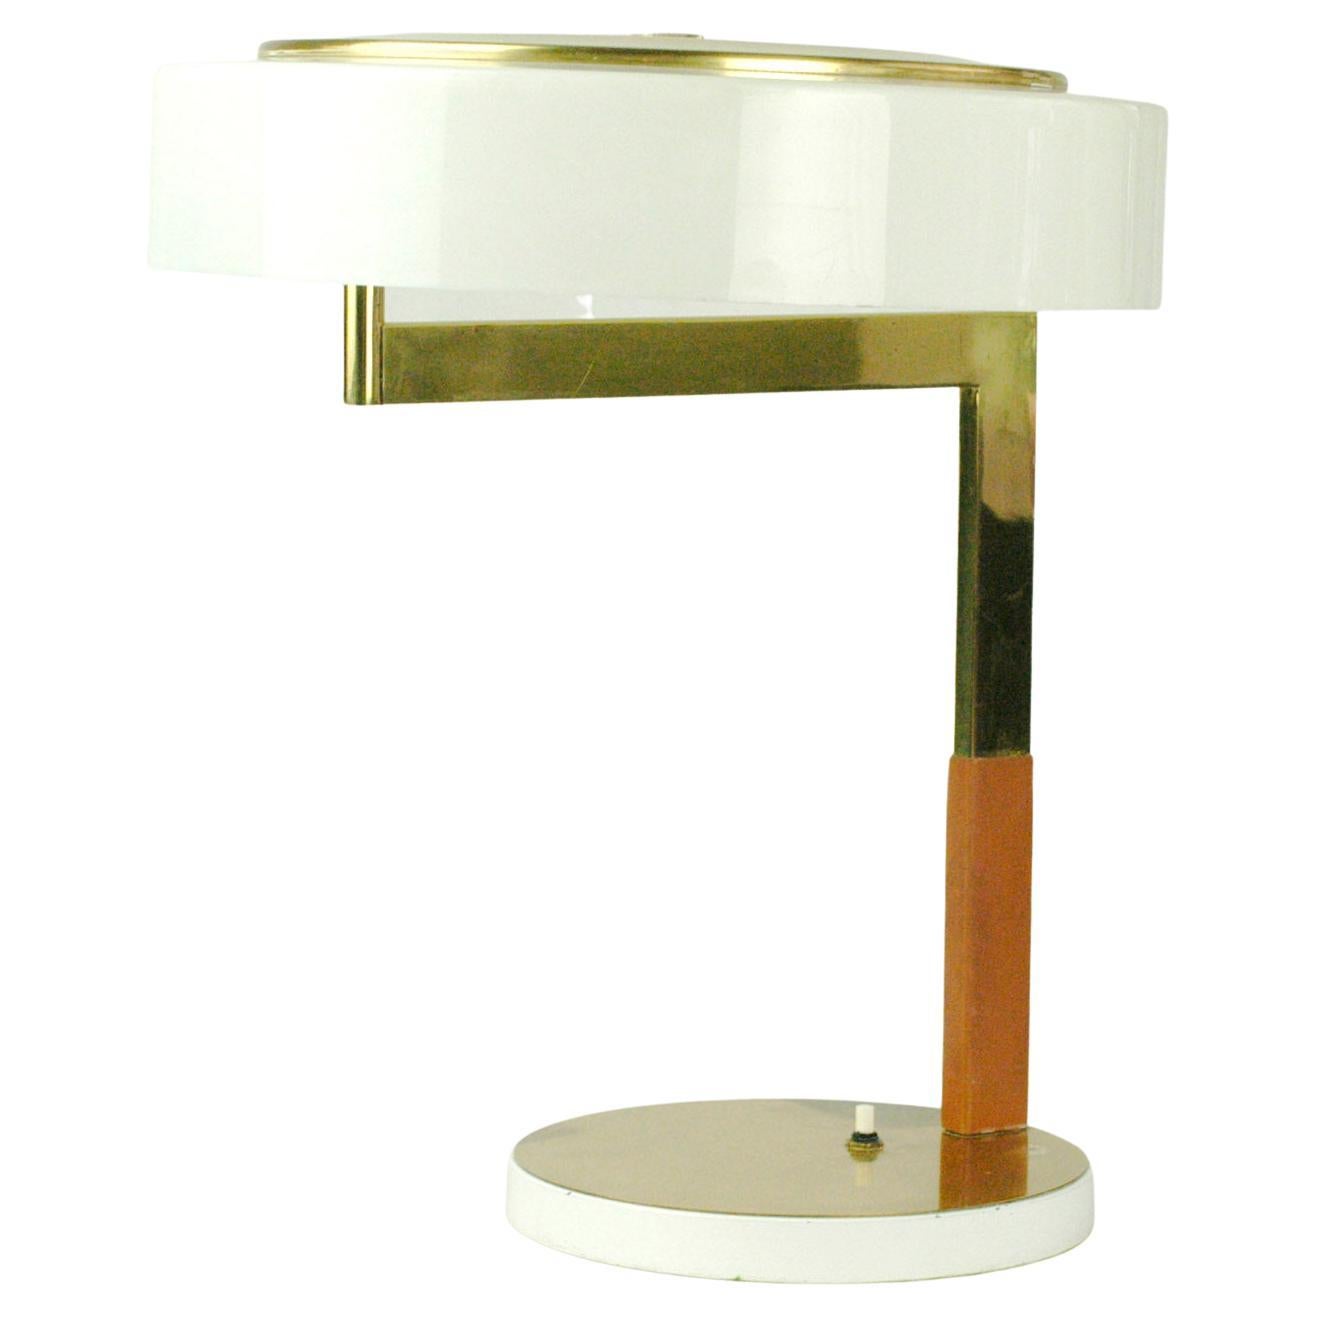 Austrian Midcentury Brass Leather and White Acrylic Desk Lamp by J.T. Kalmar